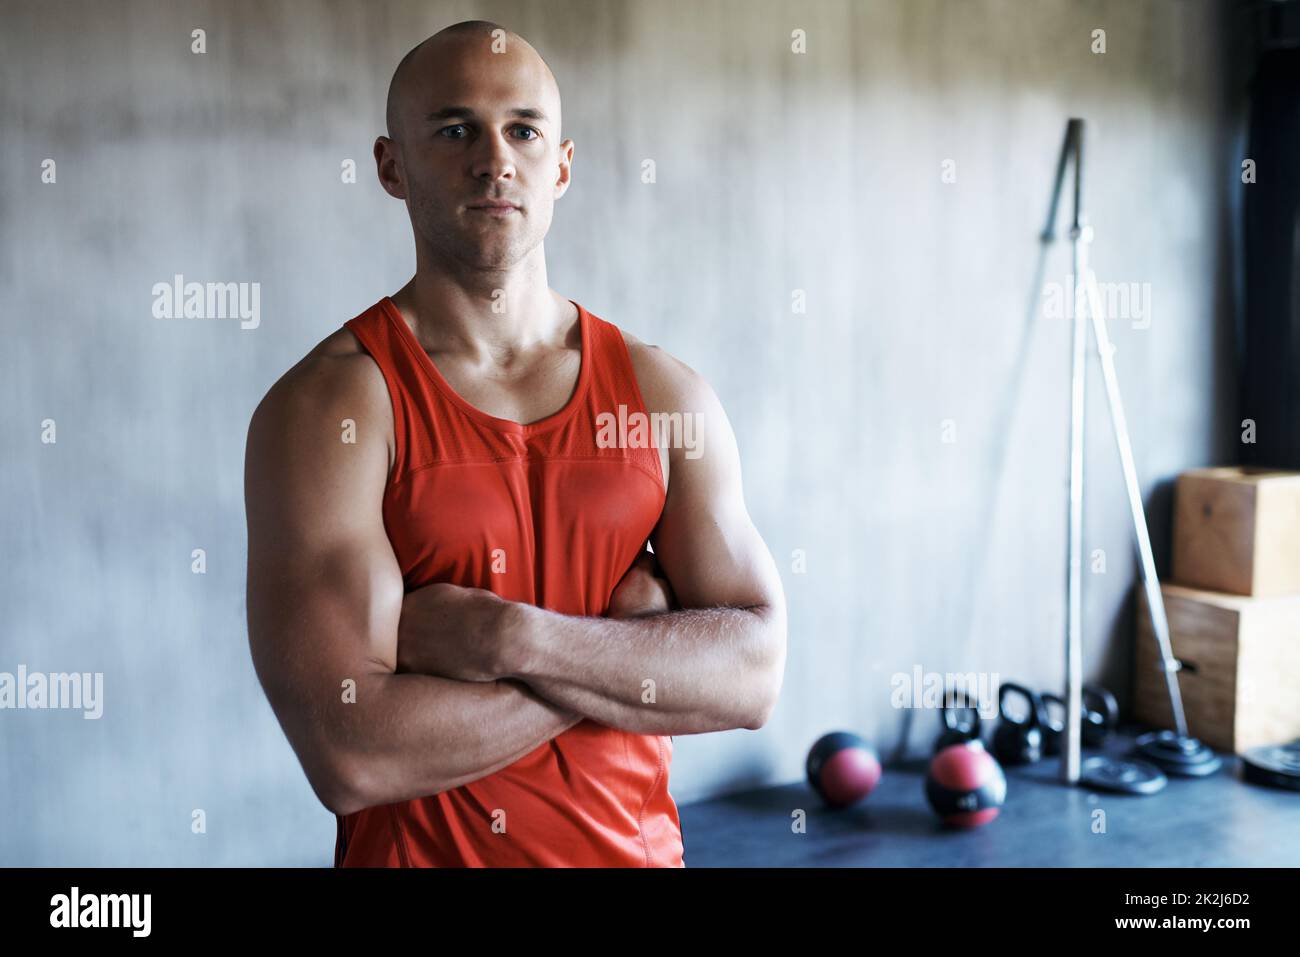 Determined to reach his fitness goals. Portrait of a man at the gym. Stock Photo